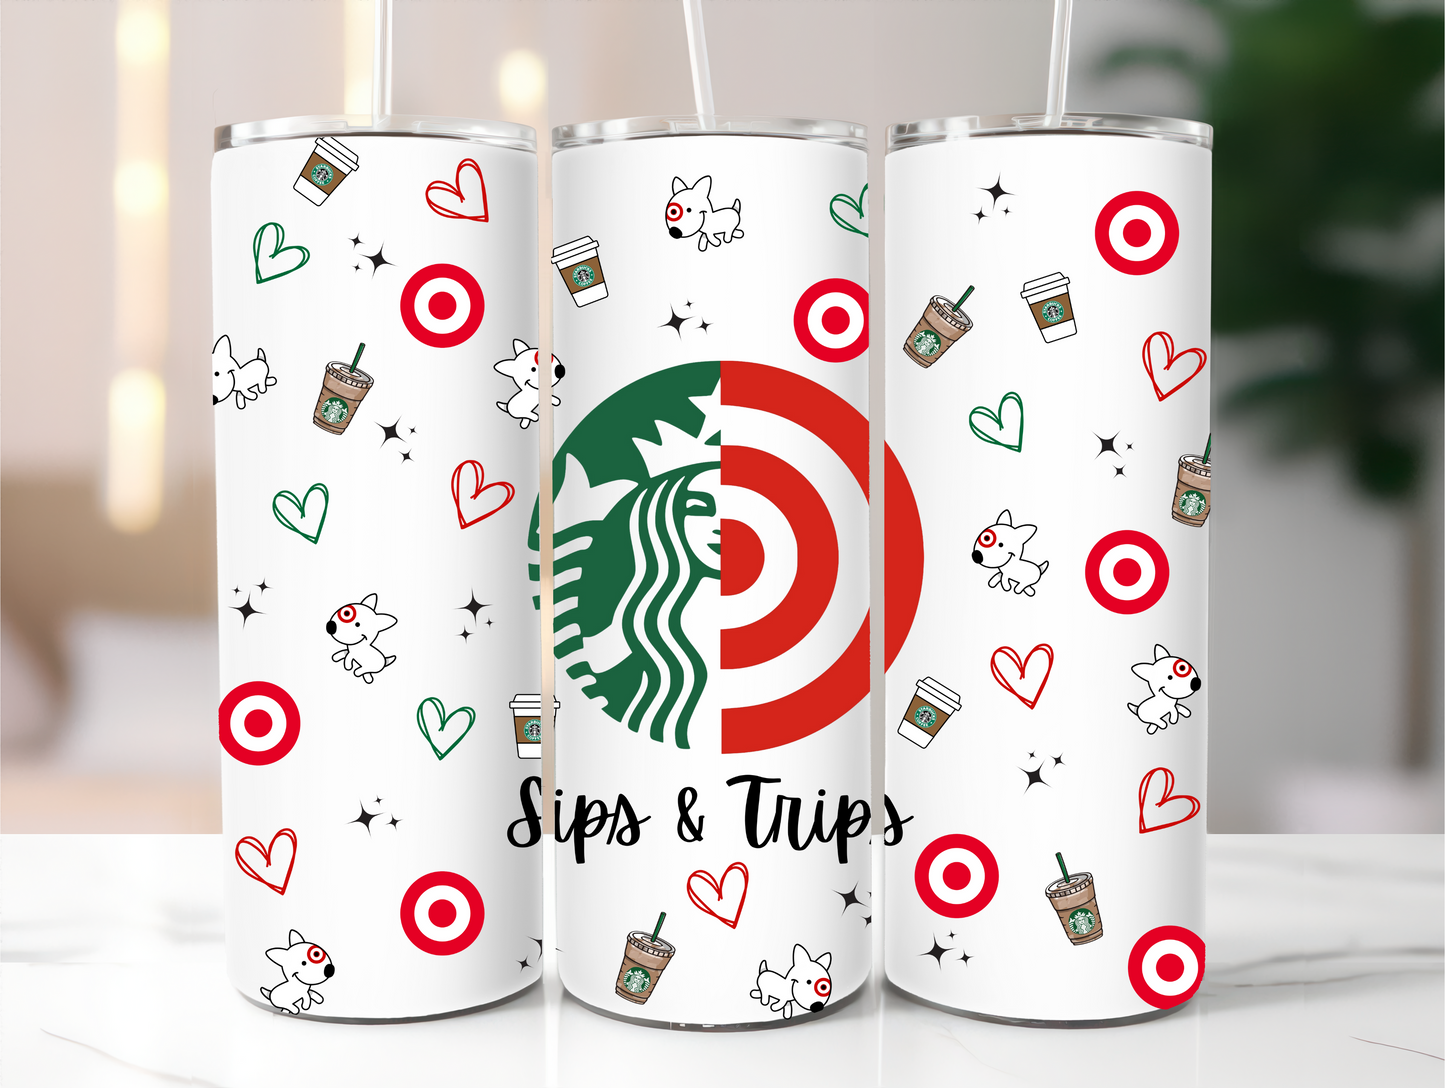 Sips & Trips Stainless Steel Tumbler